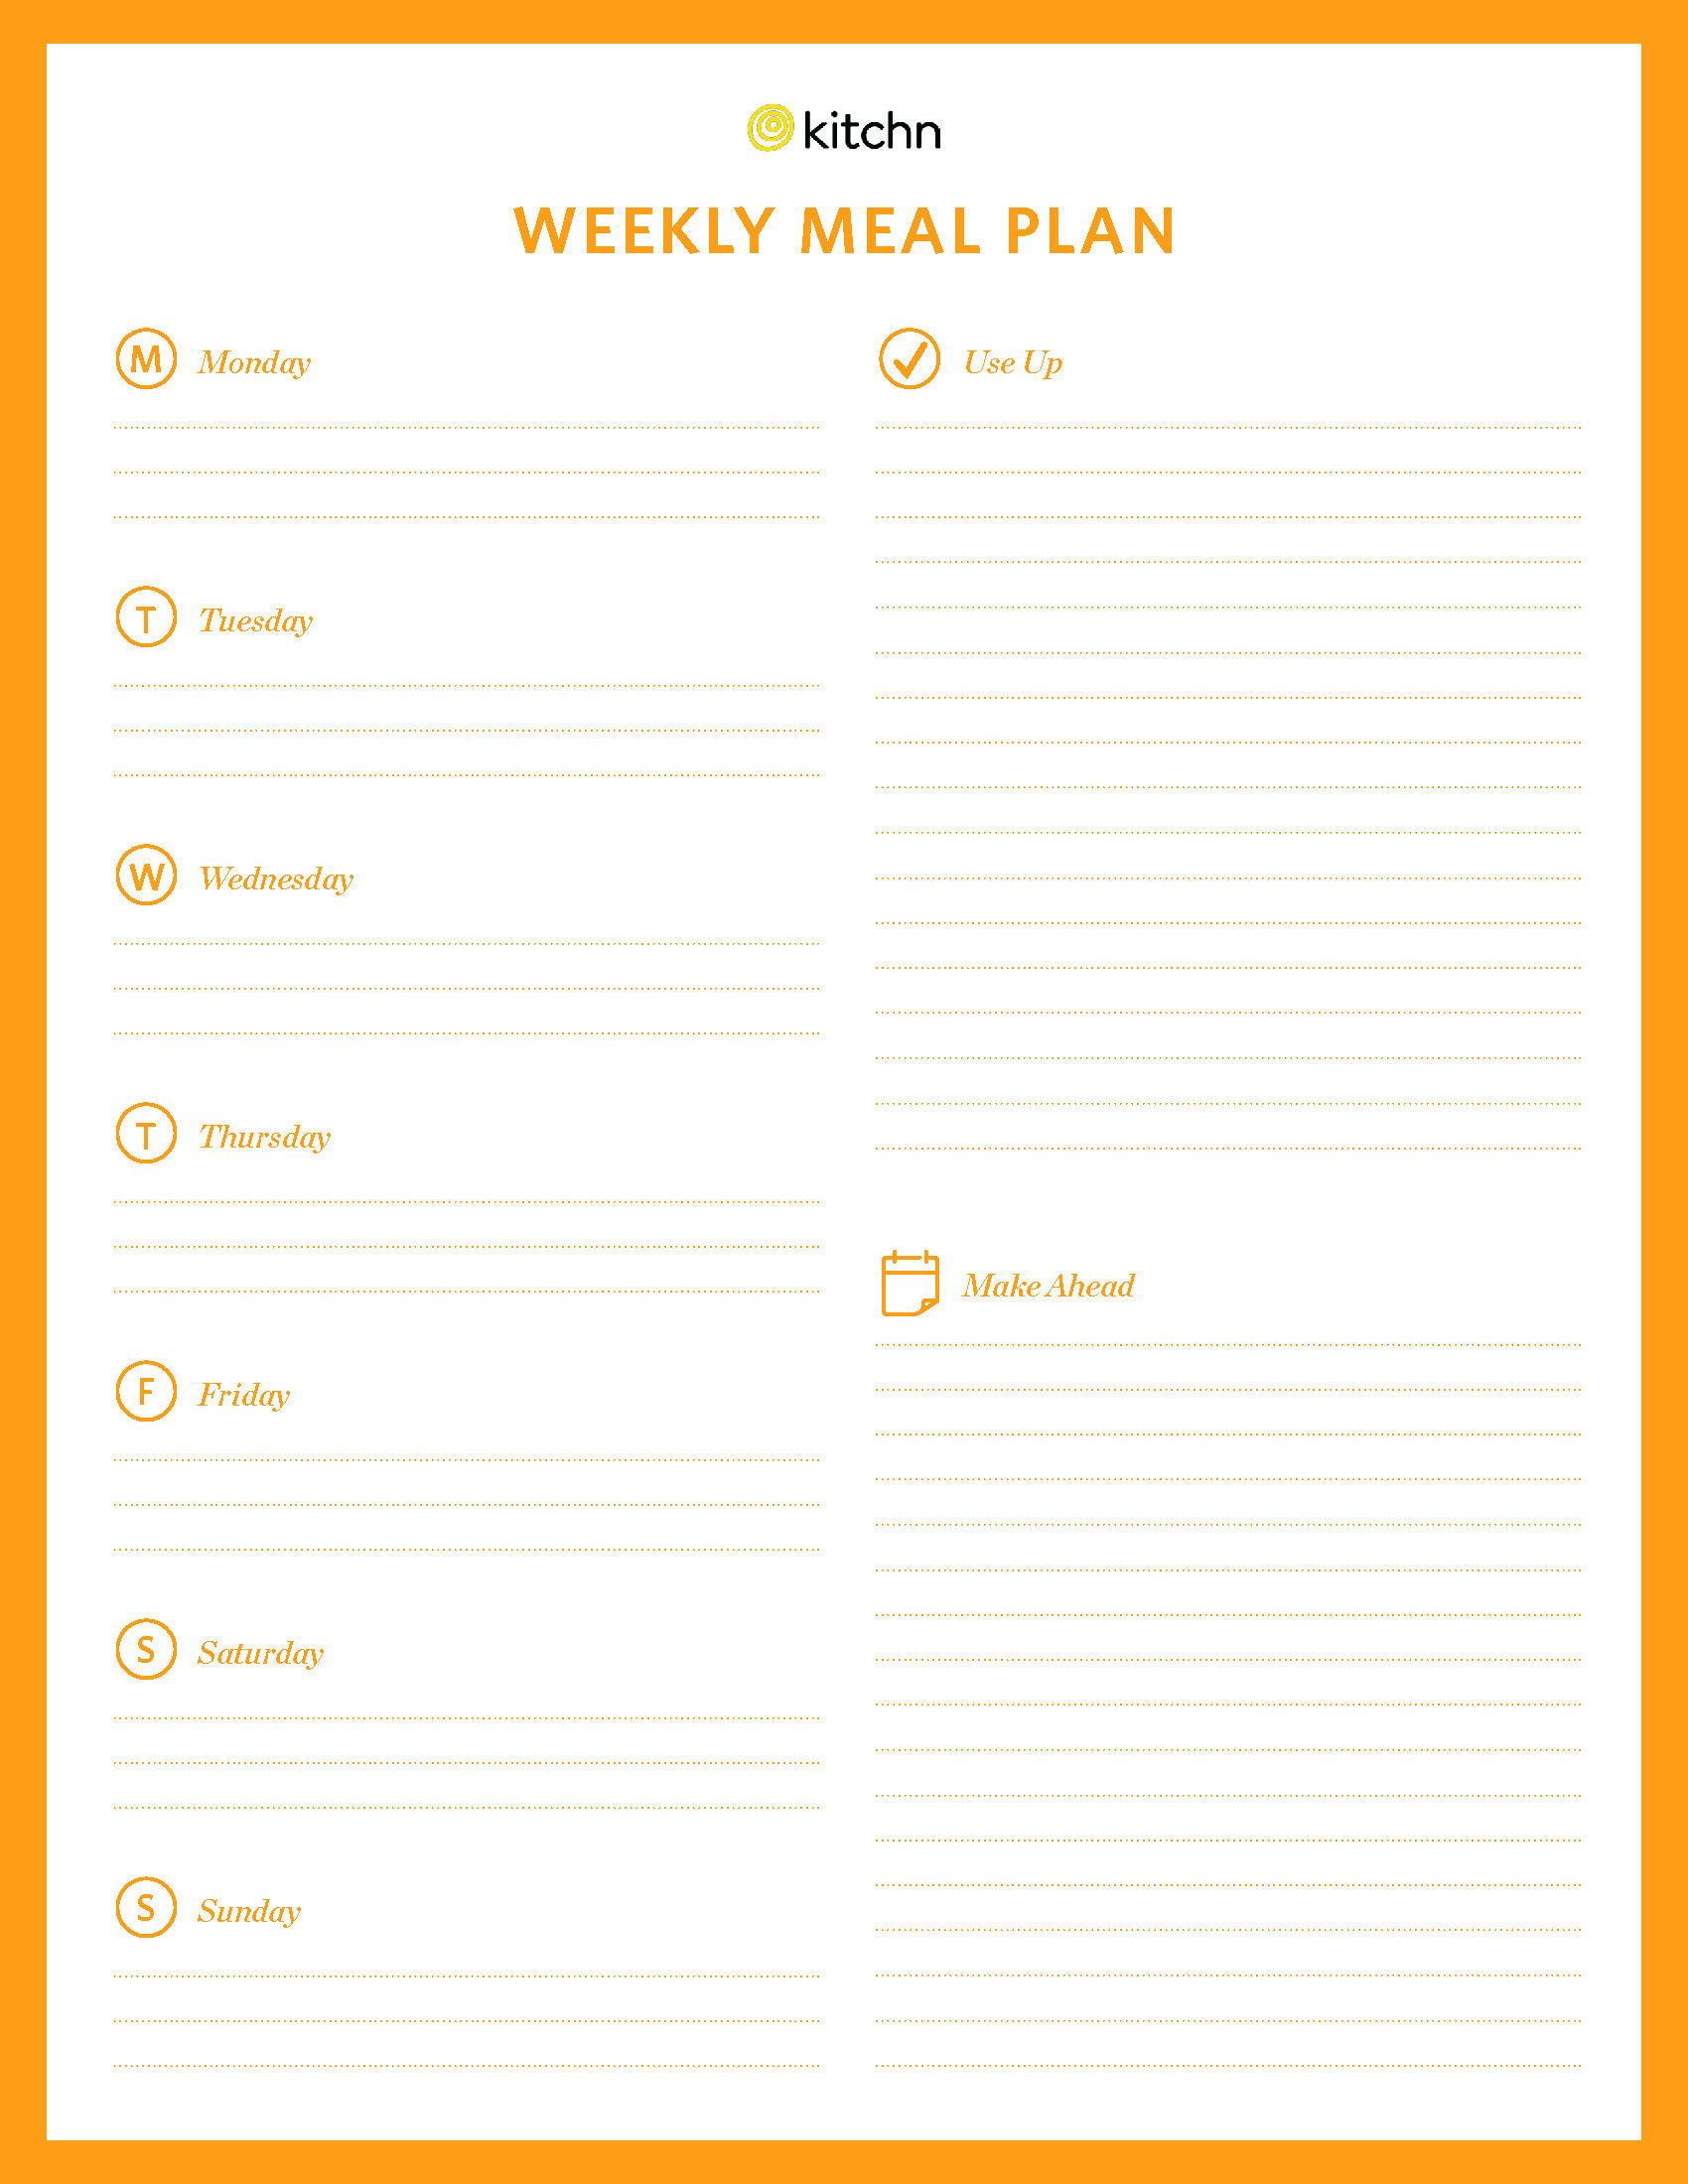 Kitchn's Meal Plan Template | Kitchn Within Blank Meal Plan Template